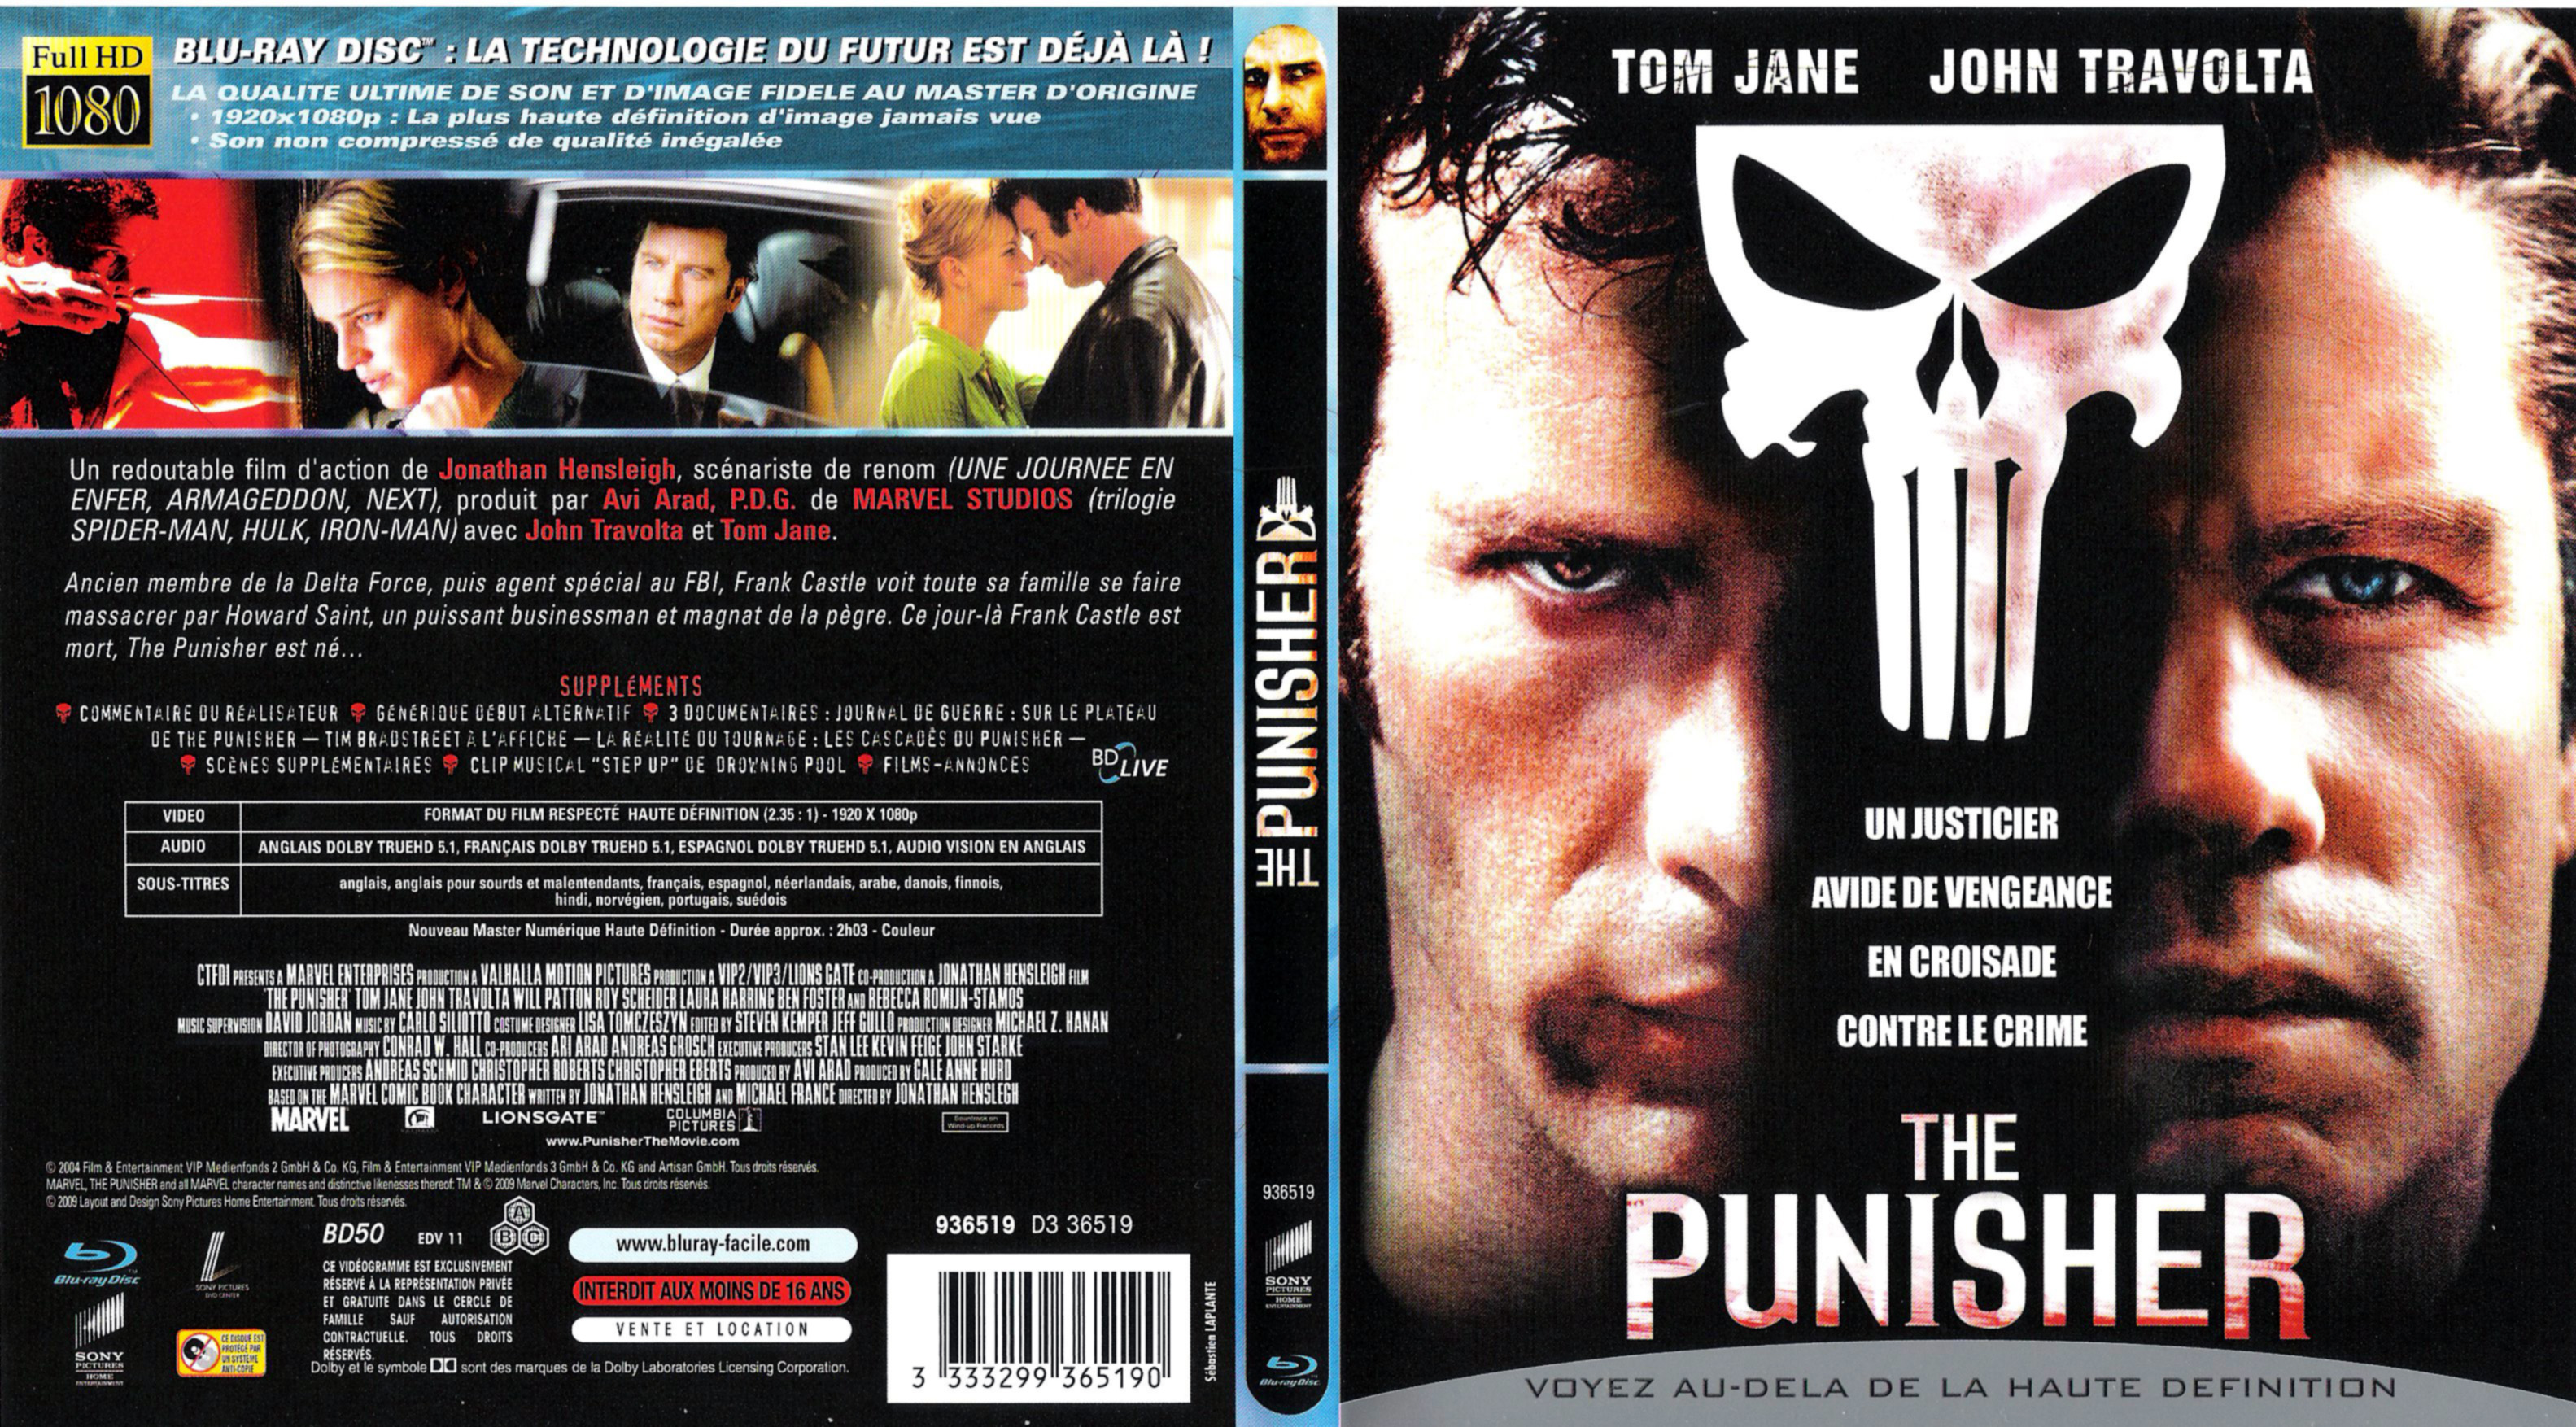 Jaquette DVD The punisher (BLU-RAY) v2